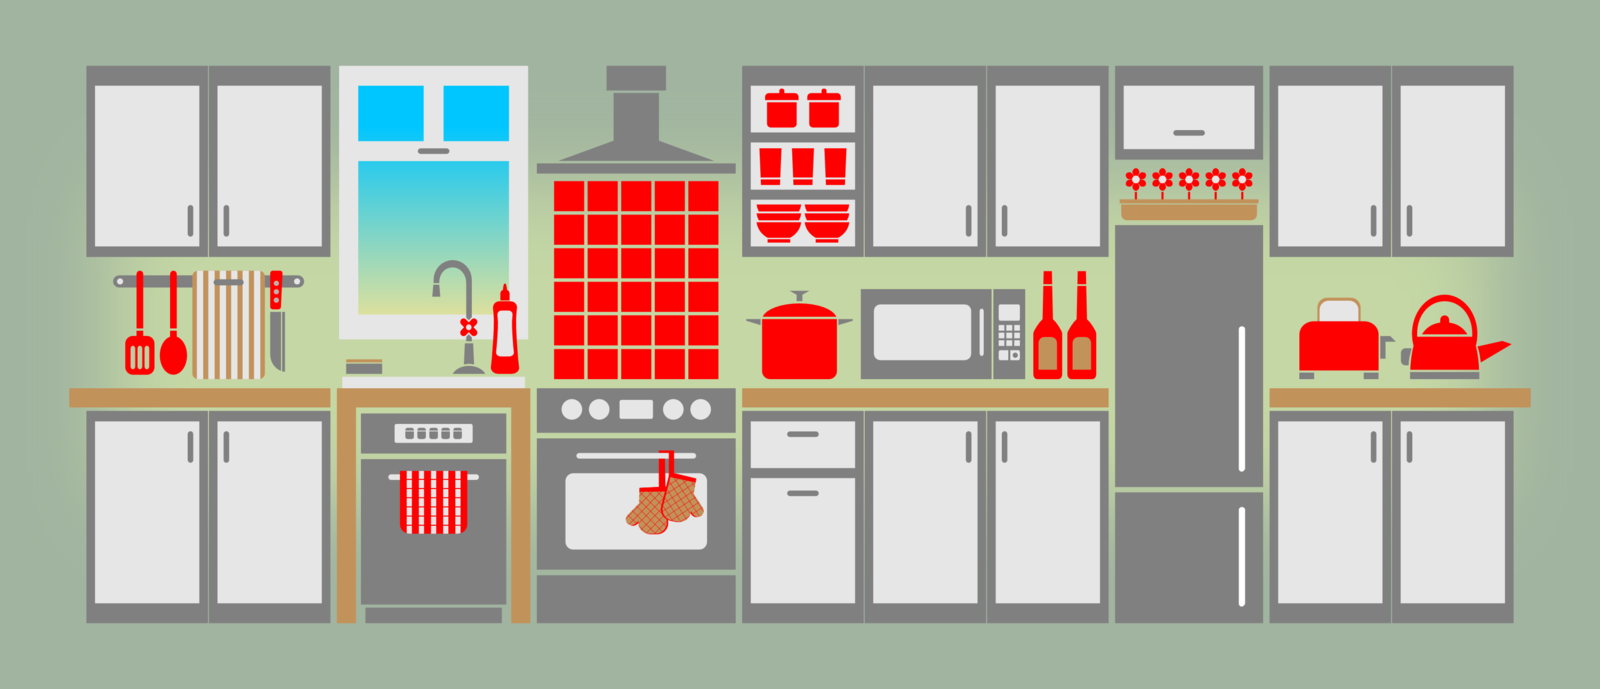 Simple Kitchen By Viscious Speed On Deviantart Clipart